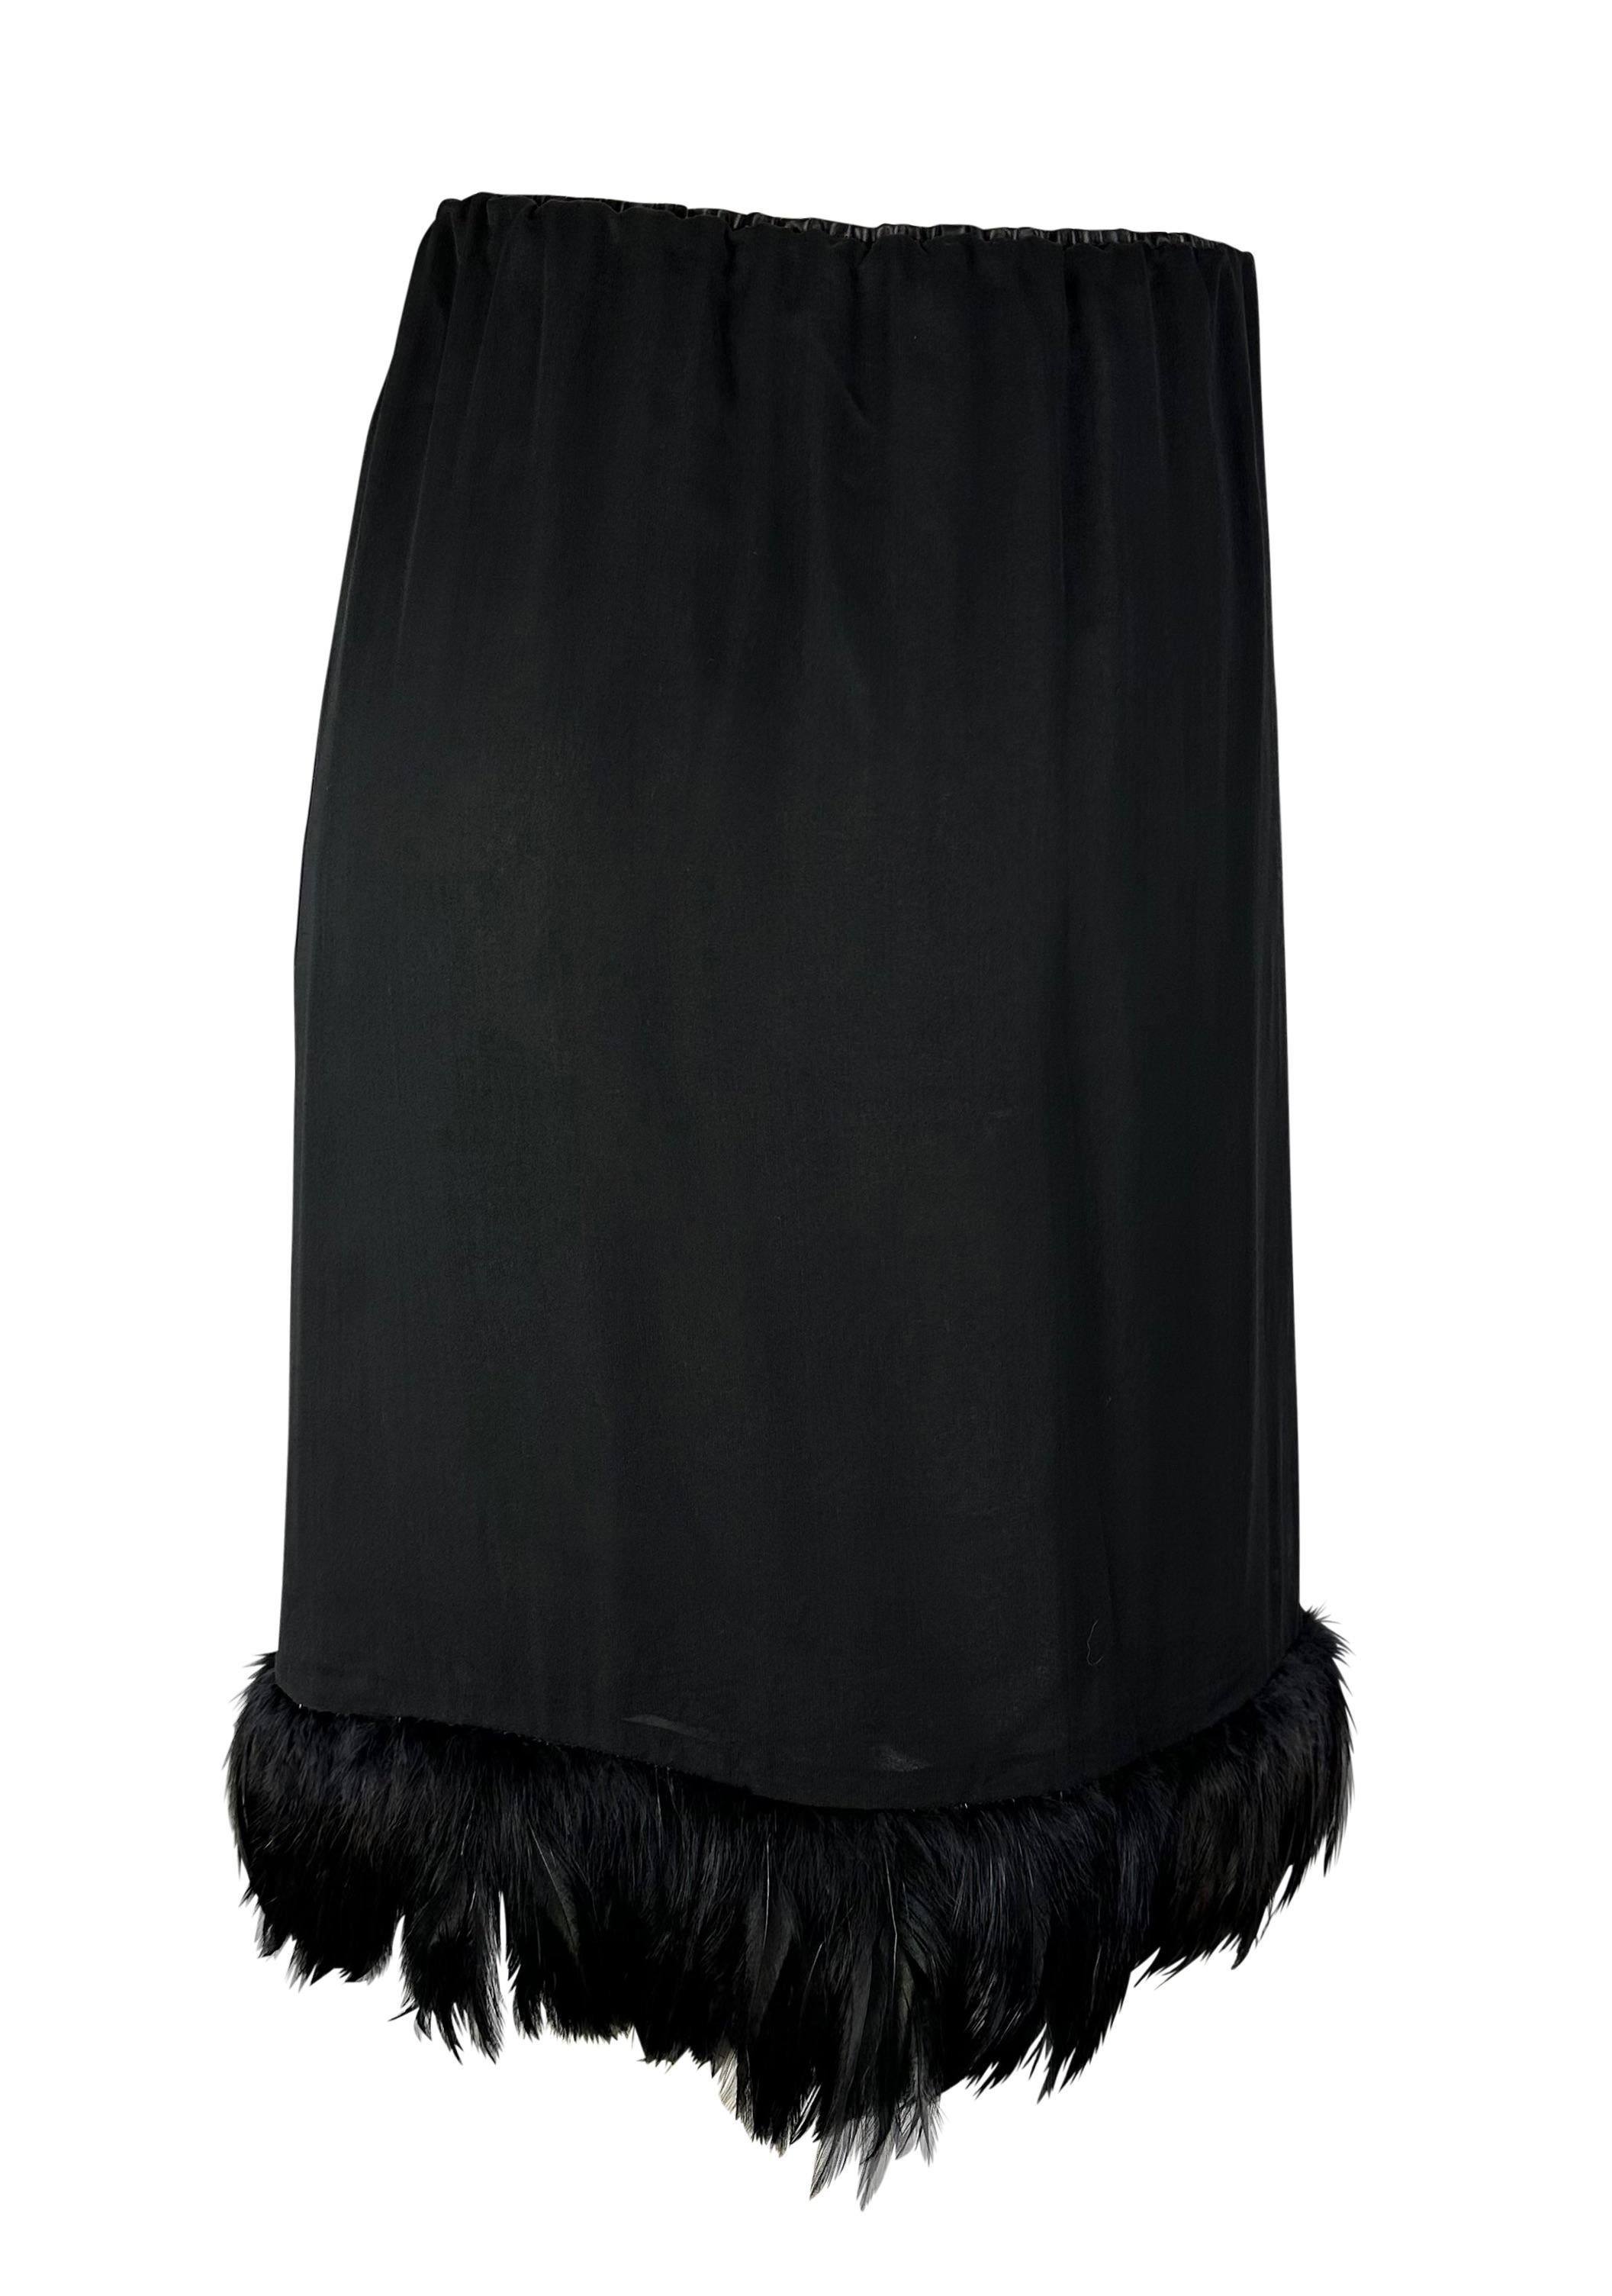 S/S 1999 Gucci by Tom Ford Black Silk Chiffon Feather Trim Logo Buckle Skirt  For Sale 3